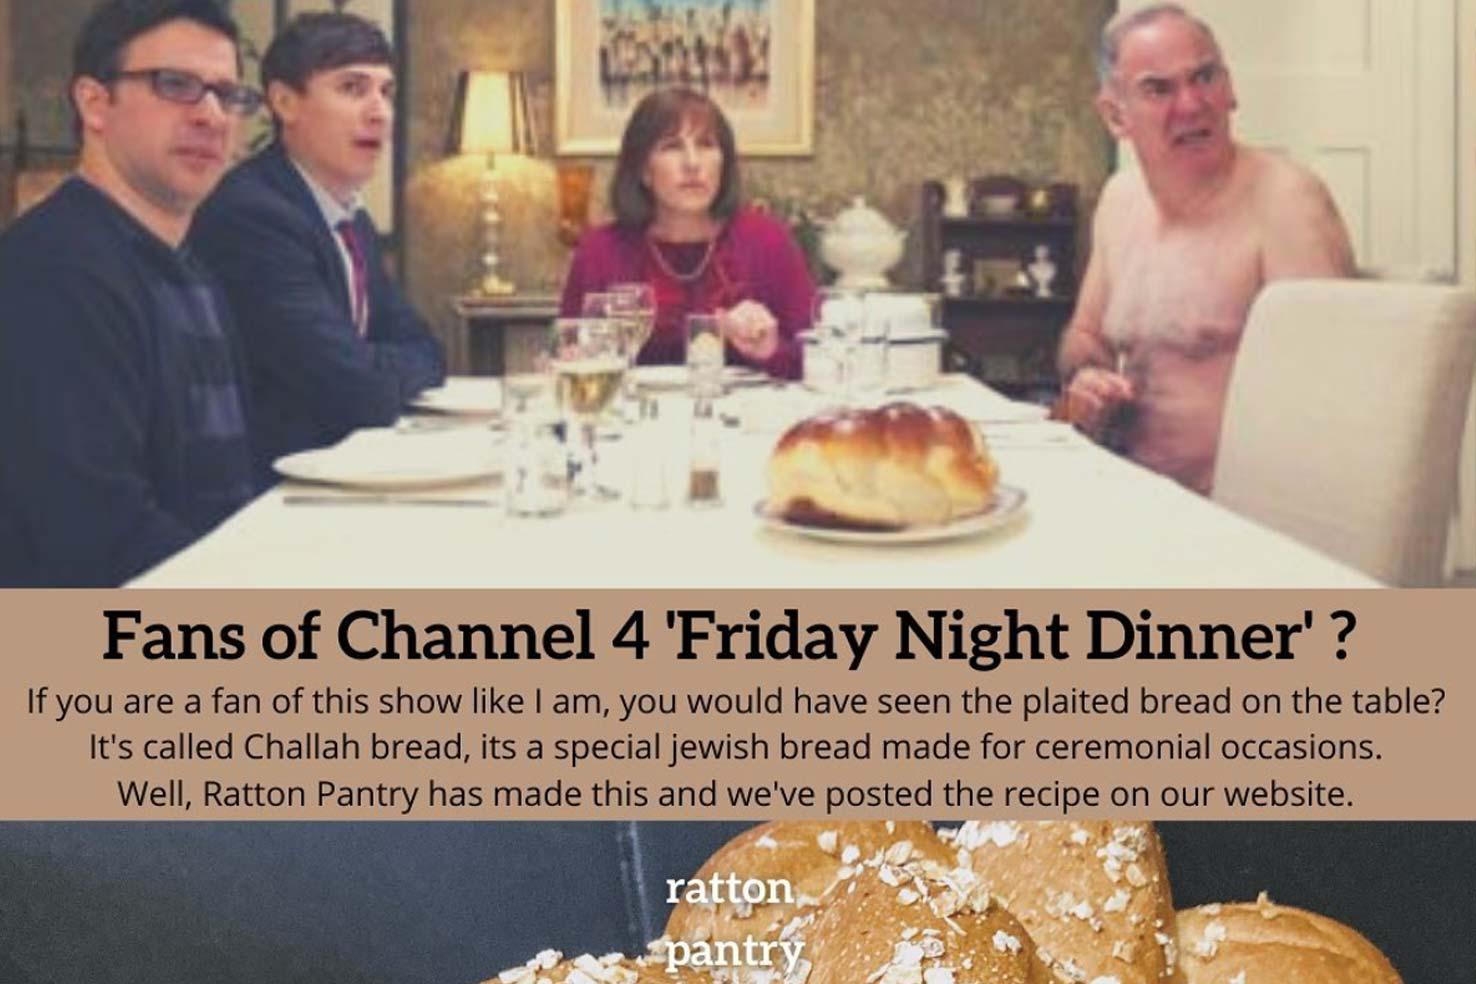 Challah Bread as seen on Channels 4's 'Friday Night Dinner' - Ratton Pantry